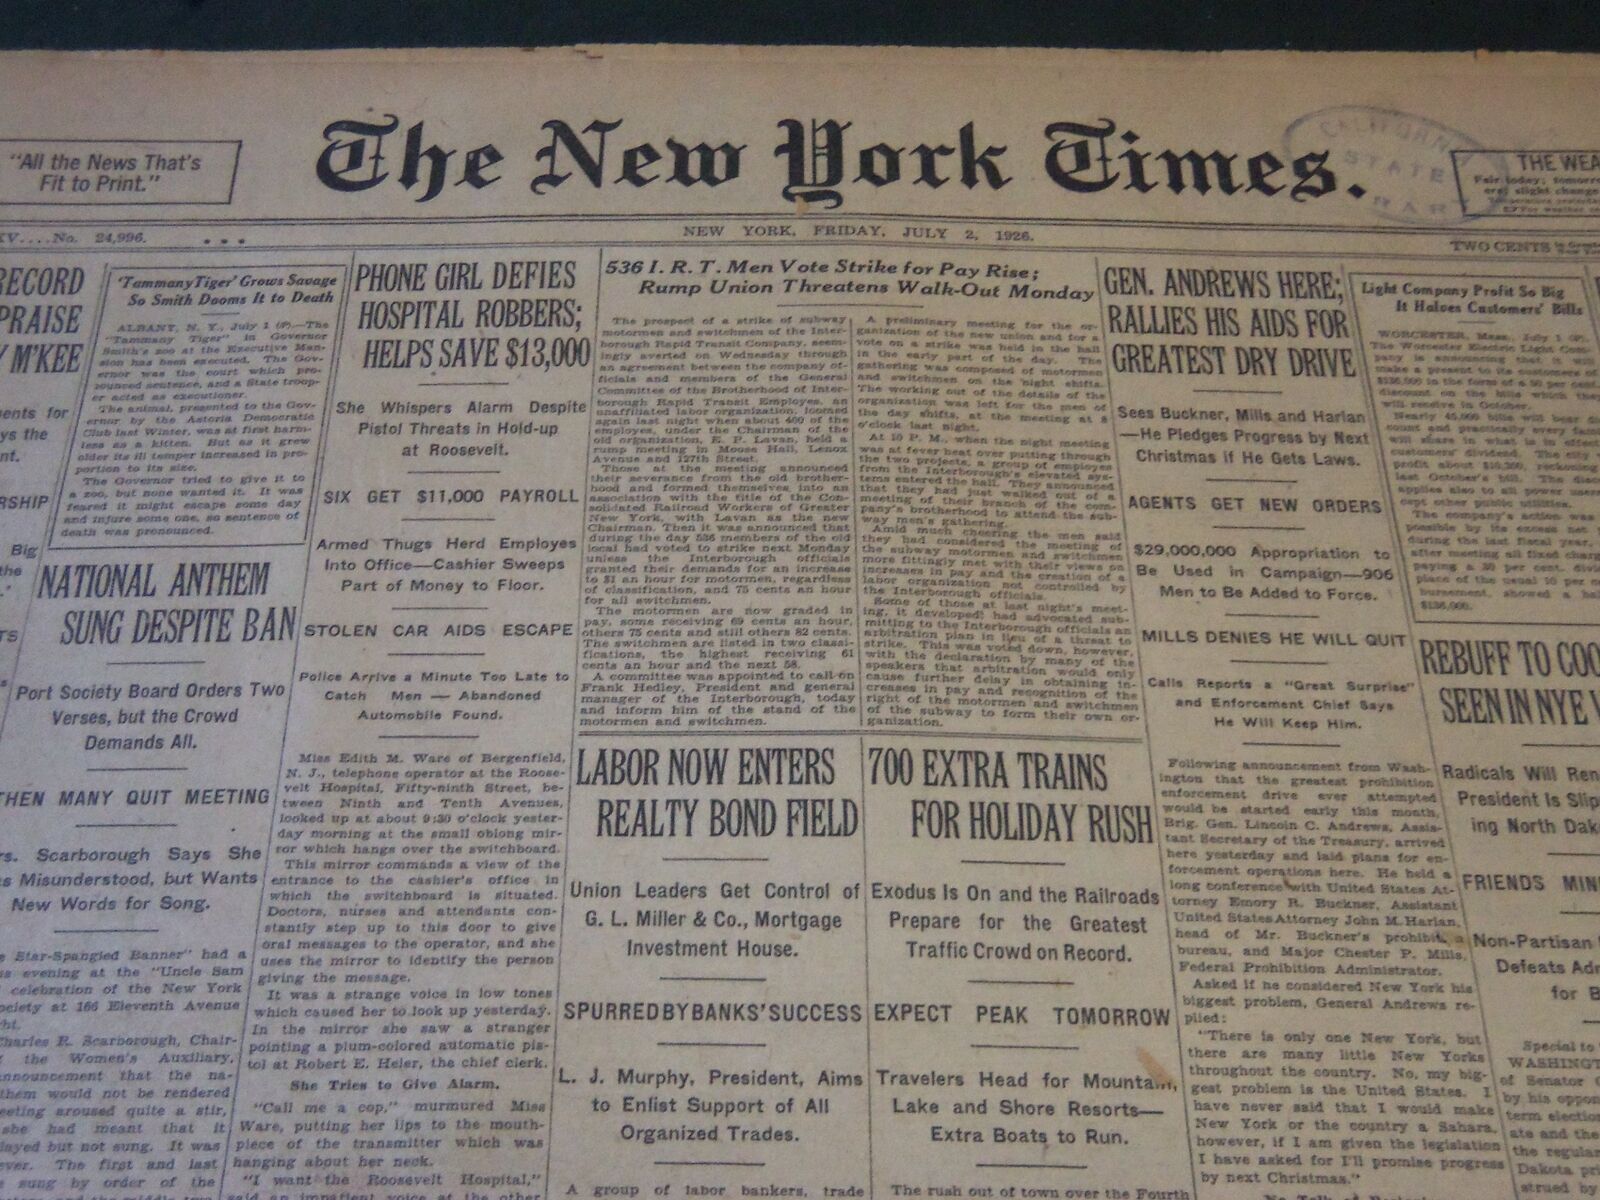 1926 JULY 2 NEW YORK TIMES - 536 I. R. T. MEN VOTE STRIKE FOR PAY RISE - NT 5565